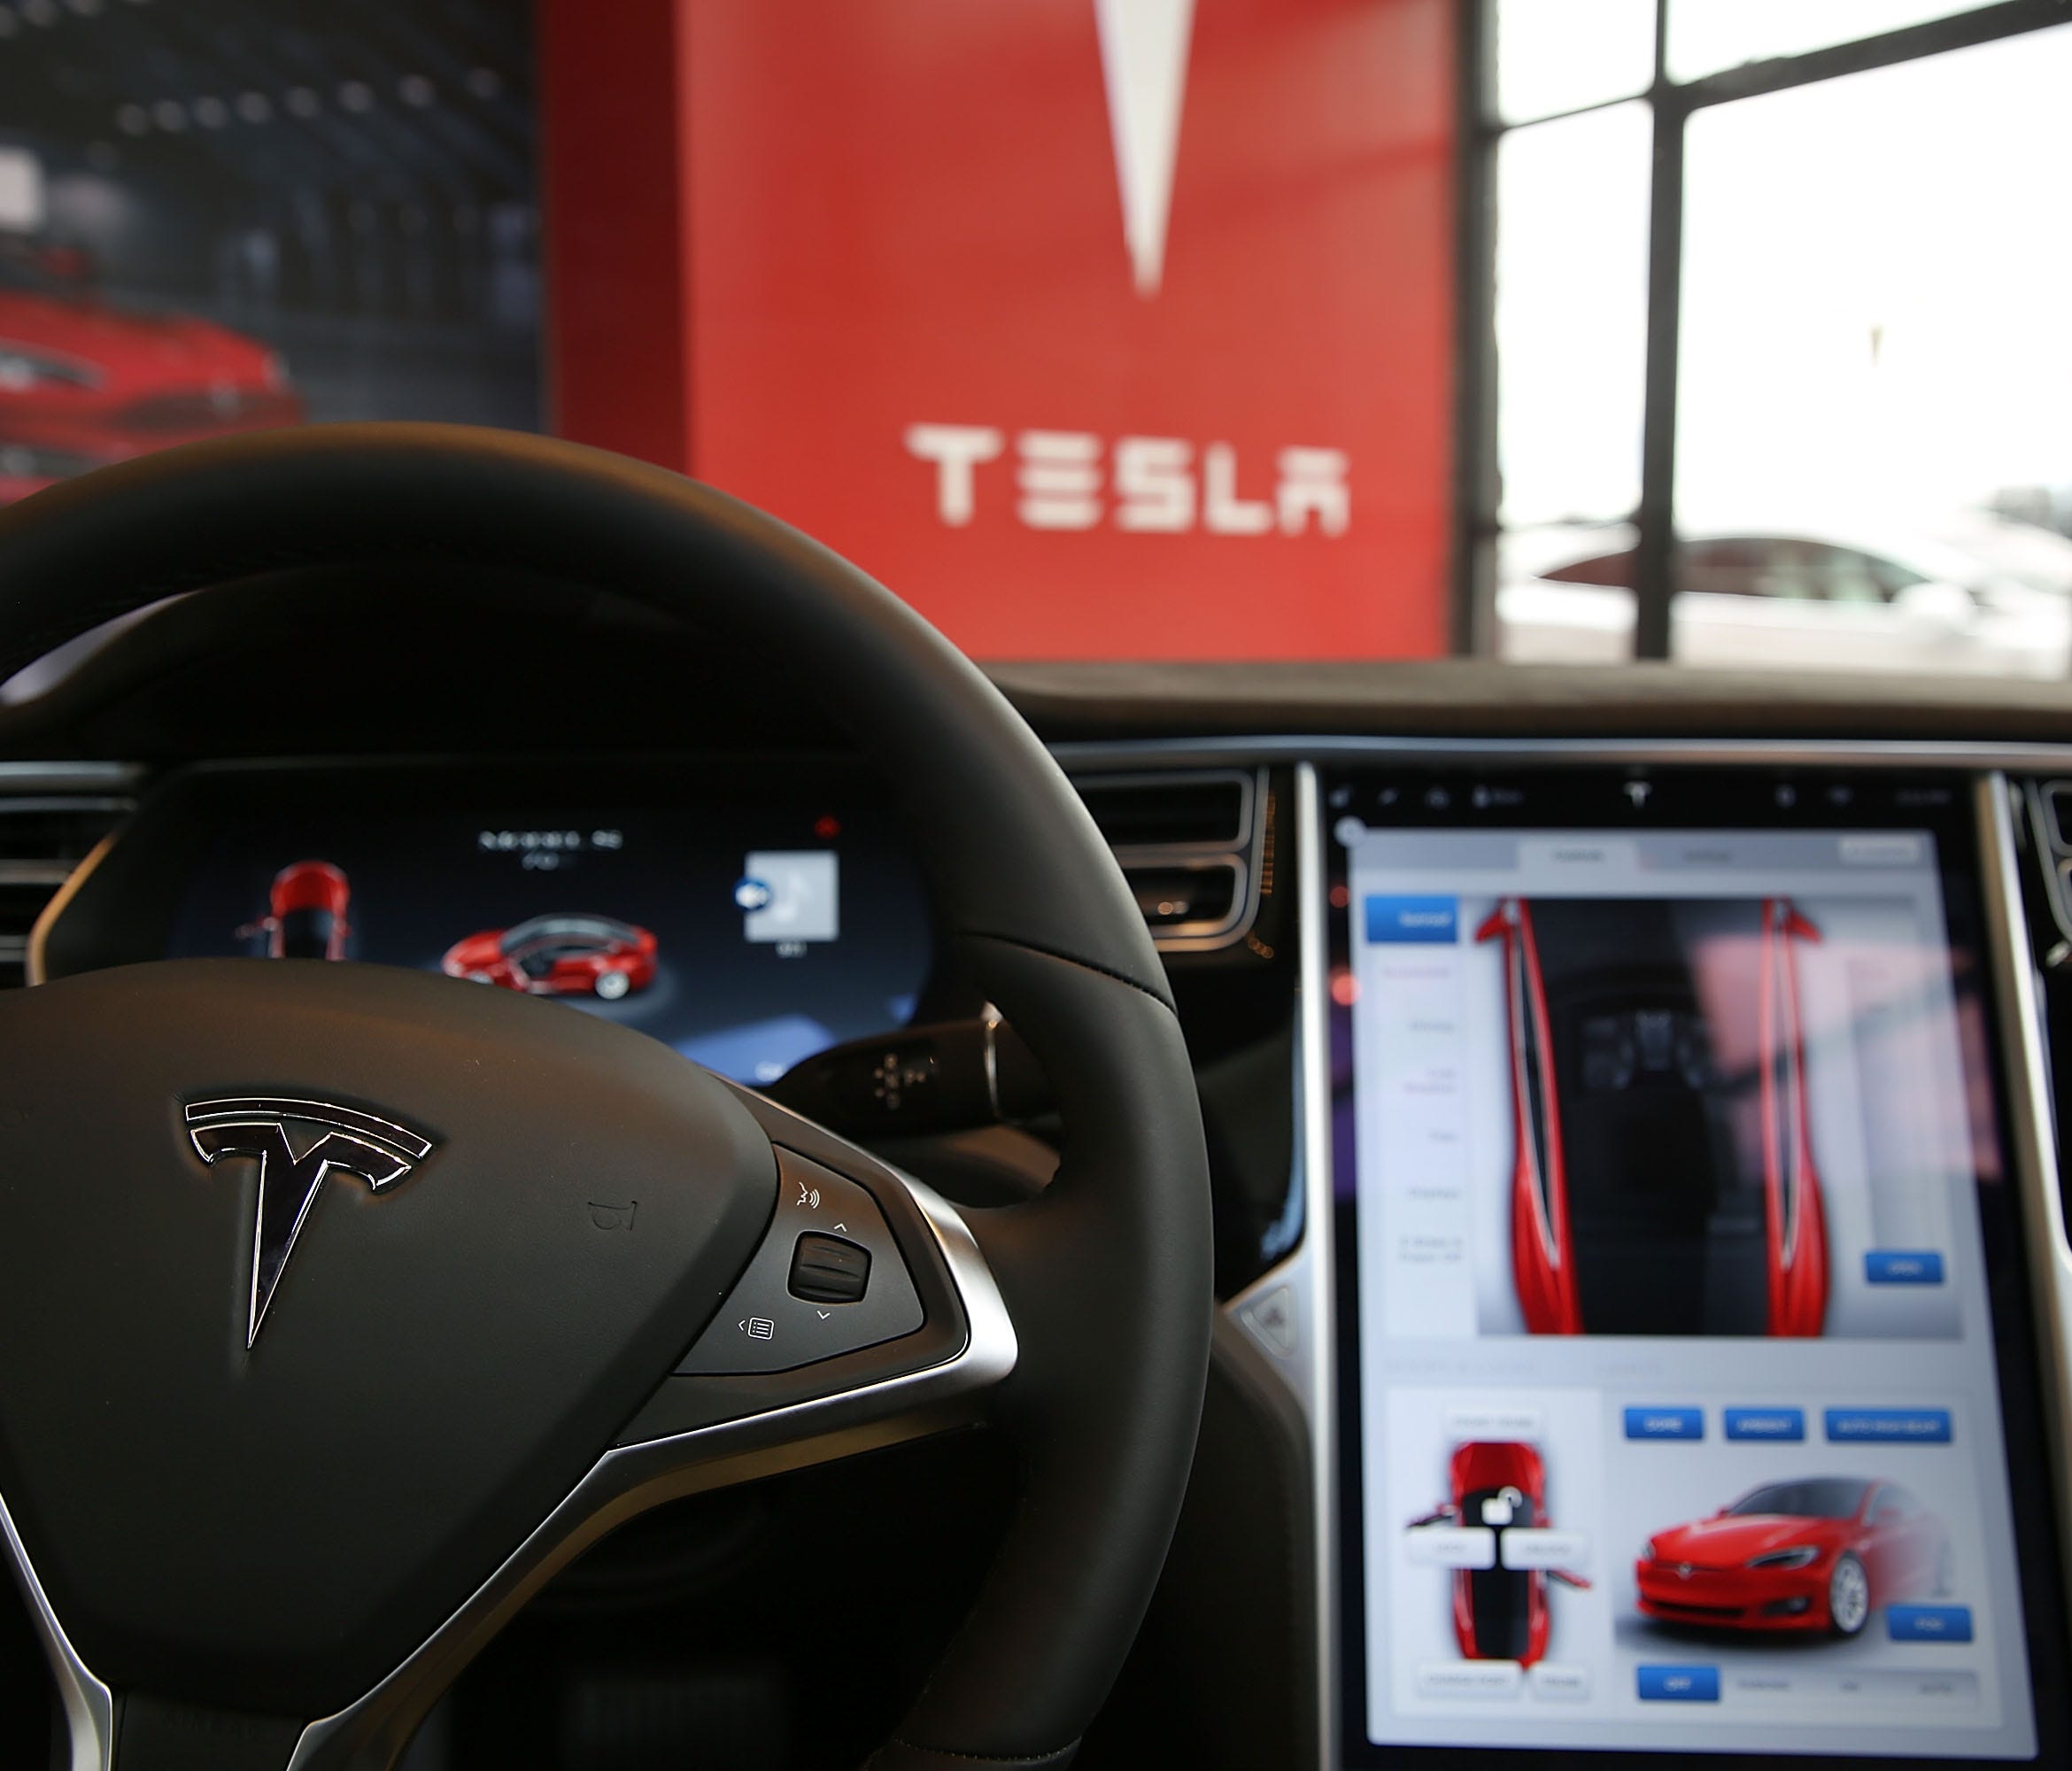 The inside of a Tesla vehicle is viewed as it sits parked in a new Tesla showroom and service center in Red Hook, Brooklyn on July 5, 2016 in New York City. The electric car company and its CEO and founder Elon Musk have come under increasing scrutin